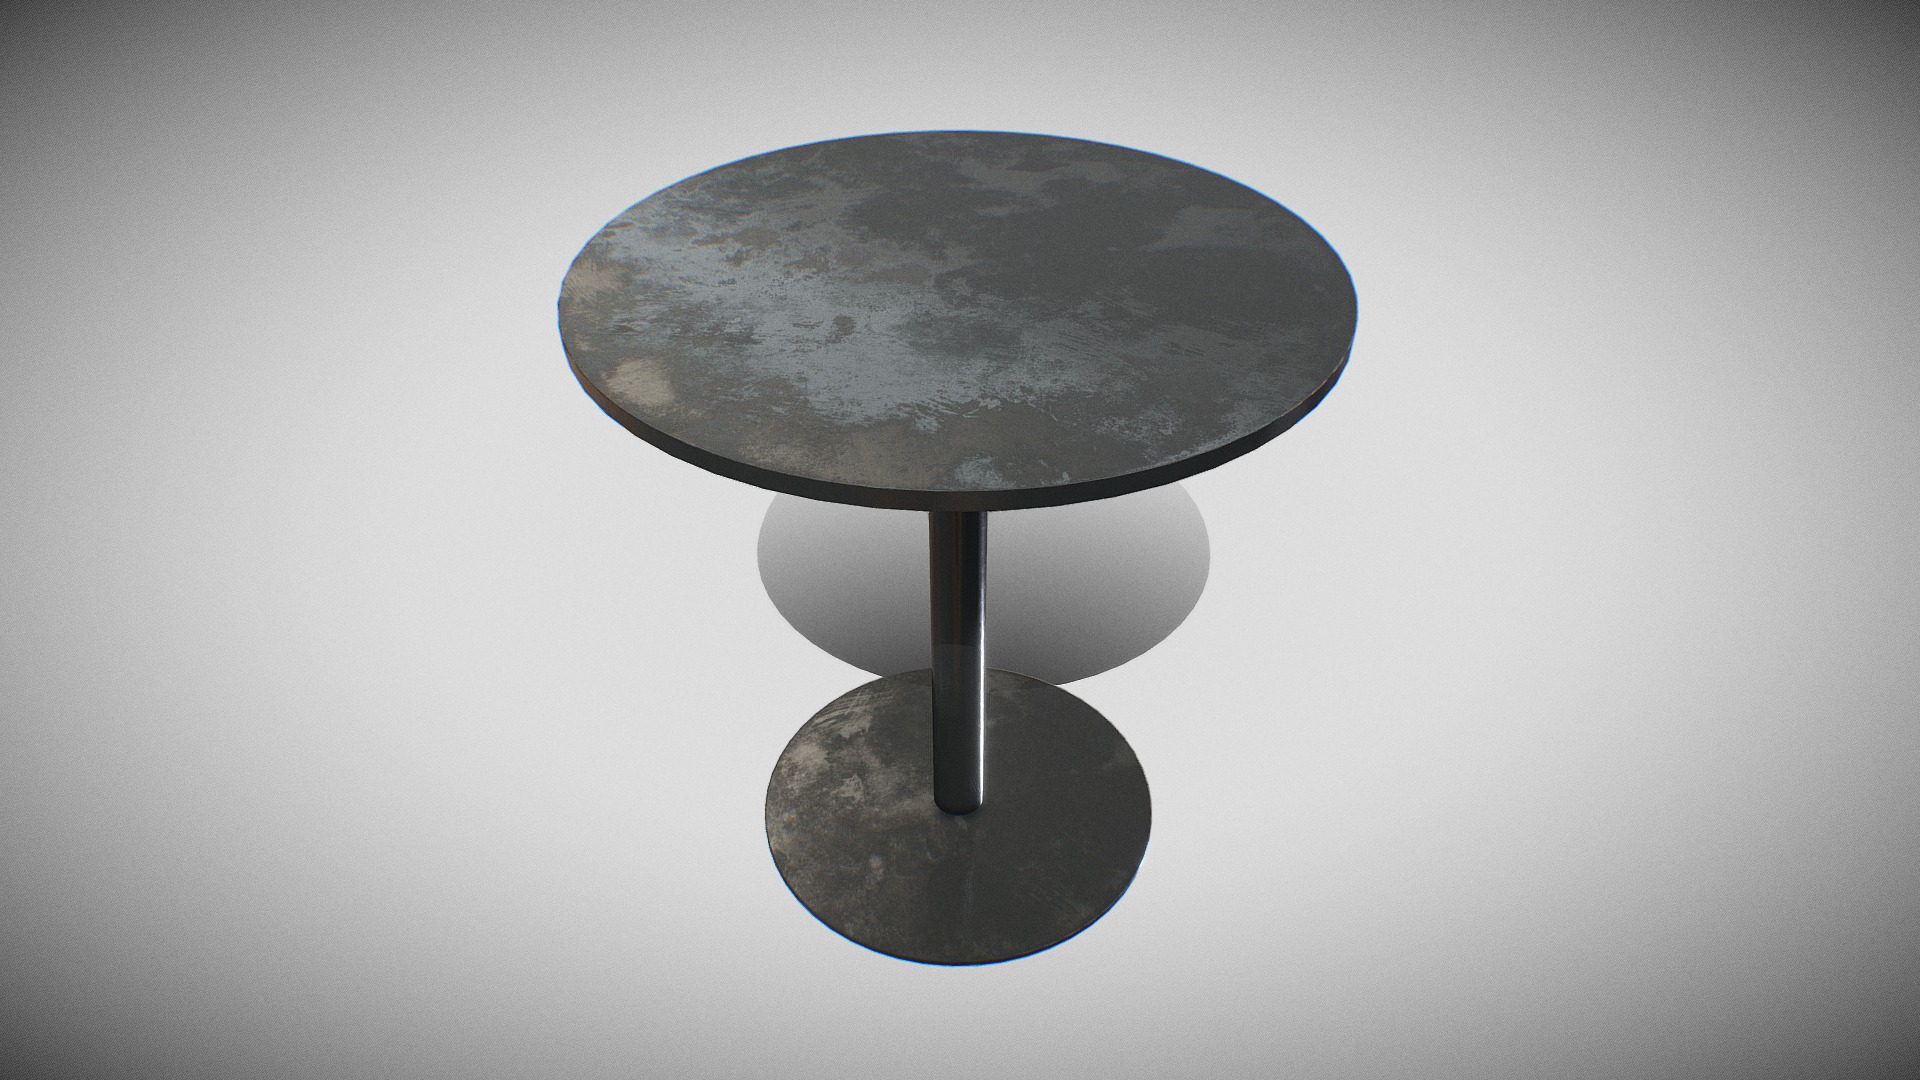 3D model Mesa Café Table – Model 4670 Steel Black Painted - This is a 3D model of the Mesa Café Table - Model 4670 Steel Black Painted. The 3D model is about a black and white photo of a round object with a black base.